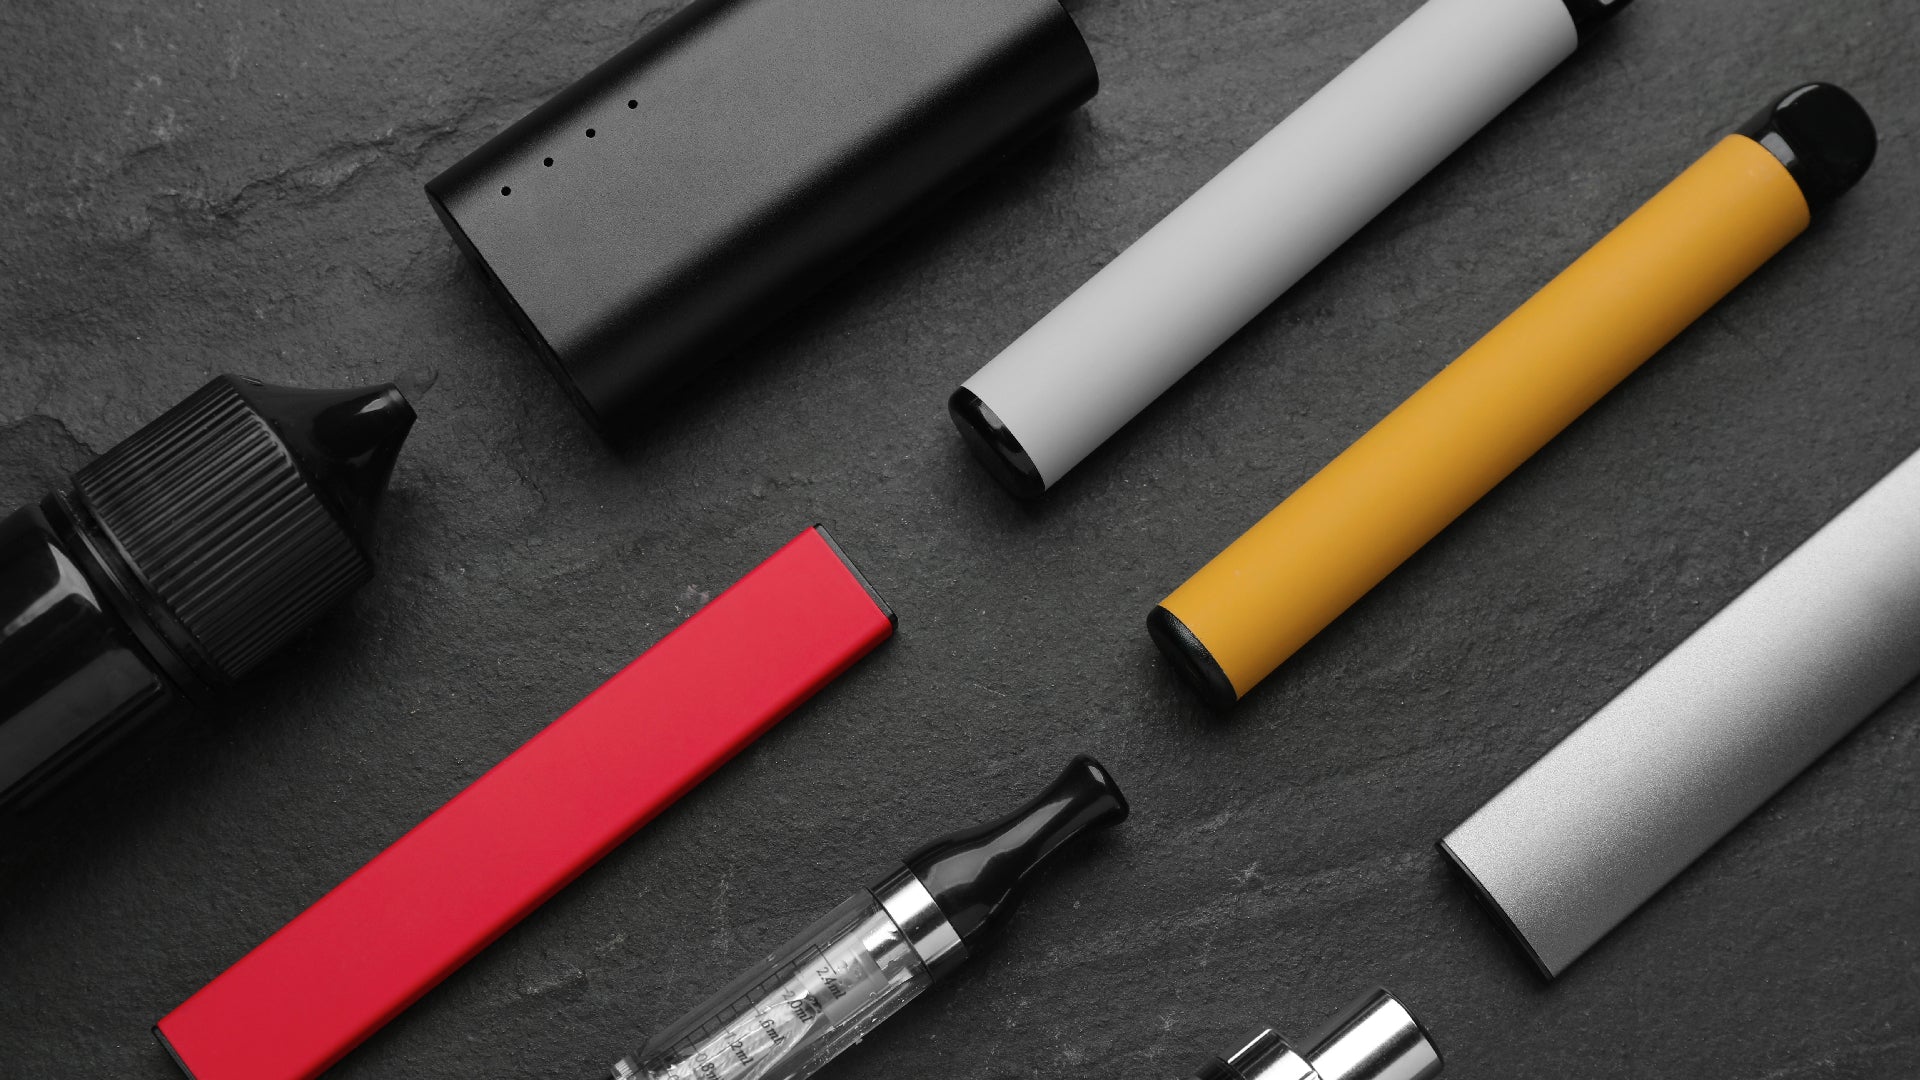 2022 - The Rise of Disposable Vapes?